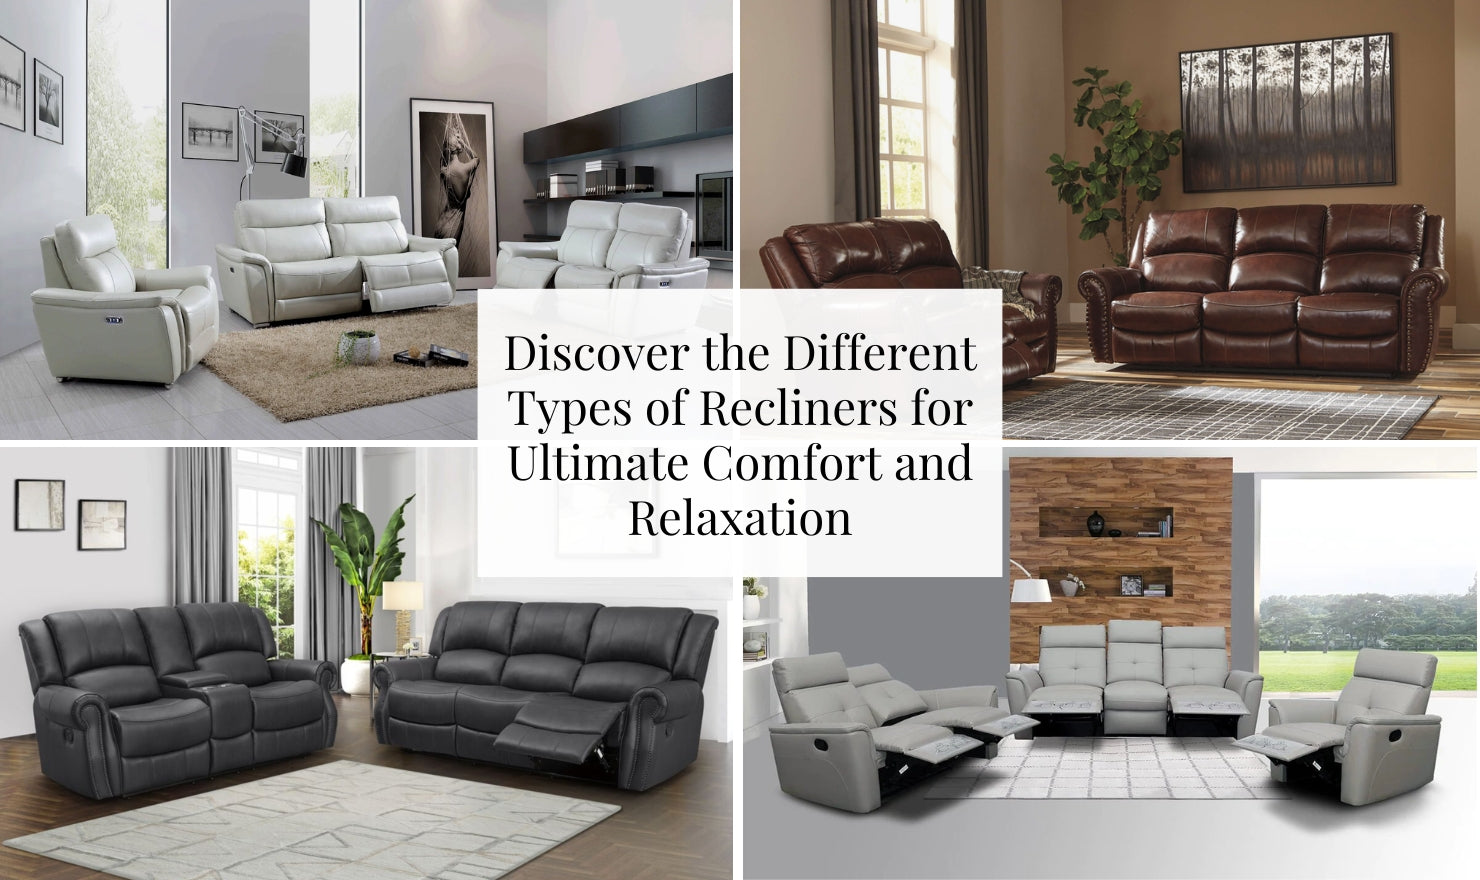 https://cdn.shopify.com/s/files/1/1101/6302/files/Discover_the_Different_Types_of_Recliners_for_Ultimate_Comfort_and_Relaxation.jpg?v=1676402519